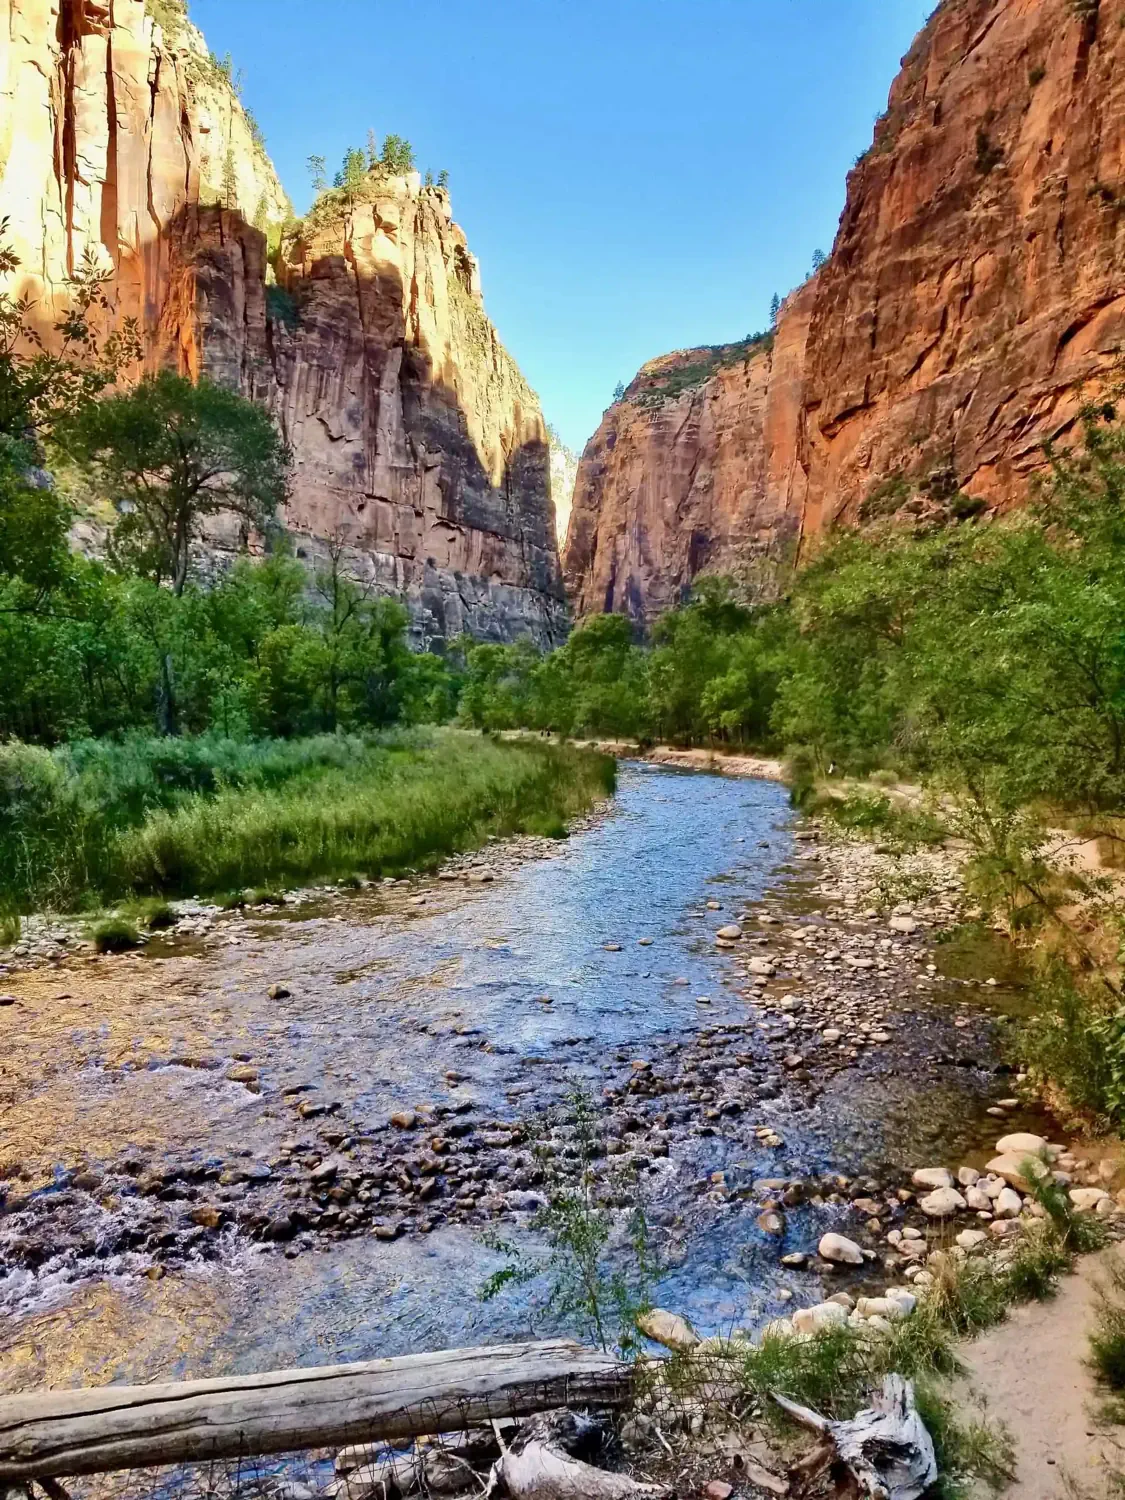 The Virgin River cuts through the canyon at Zion National Park